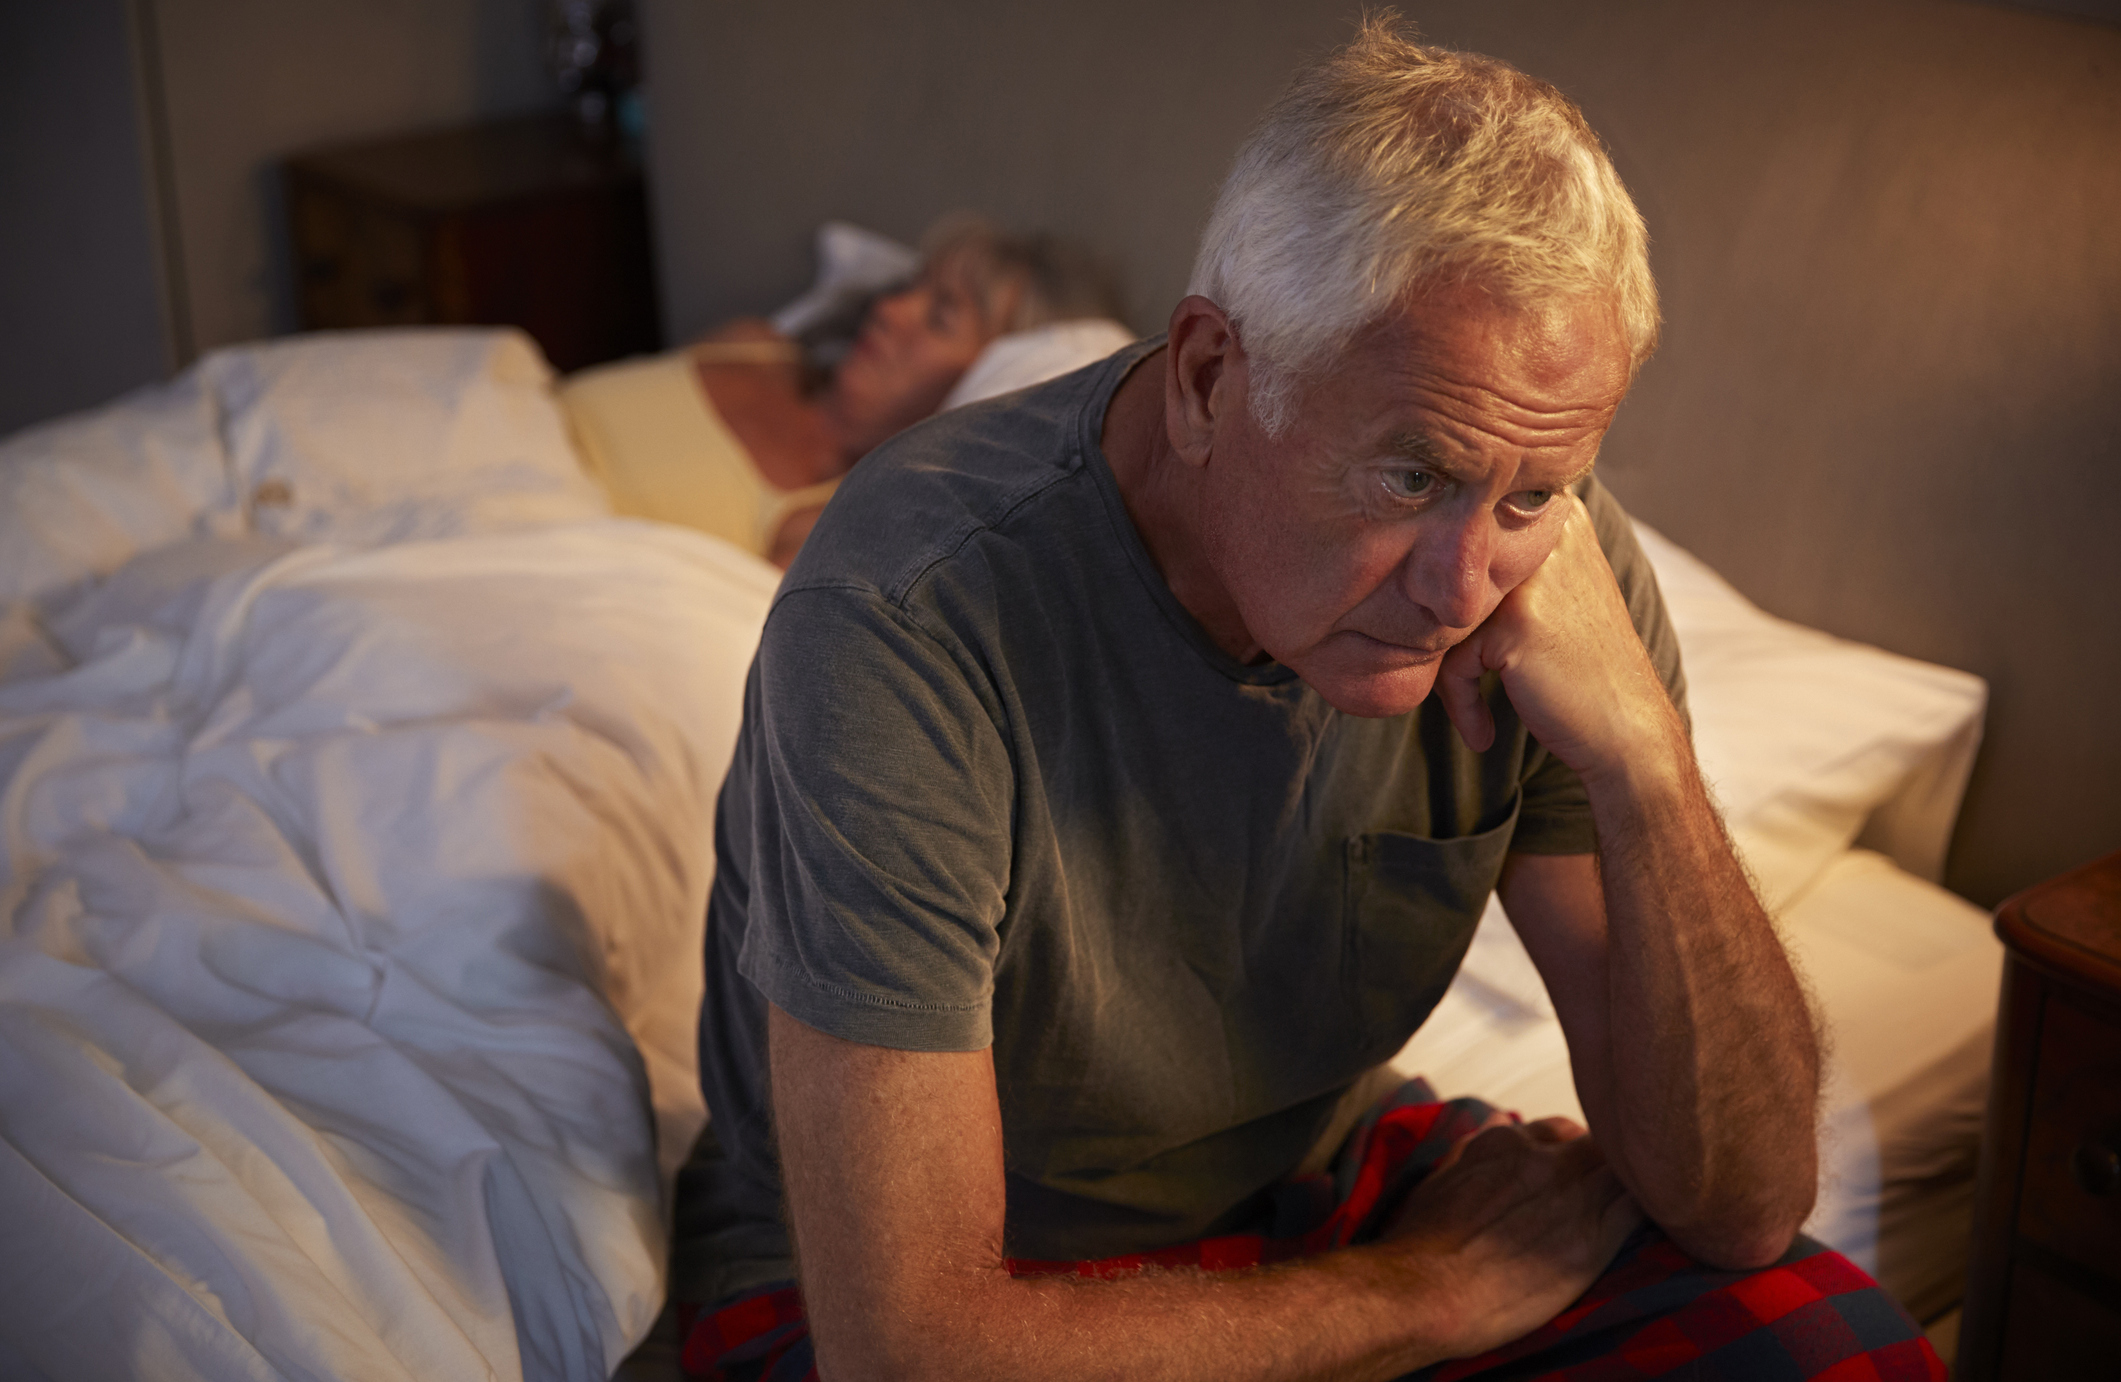 worried-senior-man-in-bed-at-night-suffering-with-insomnia